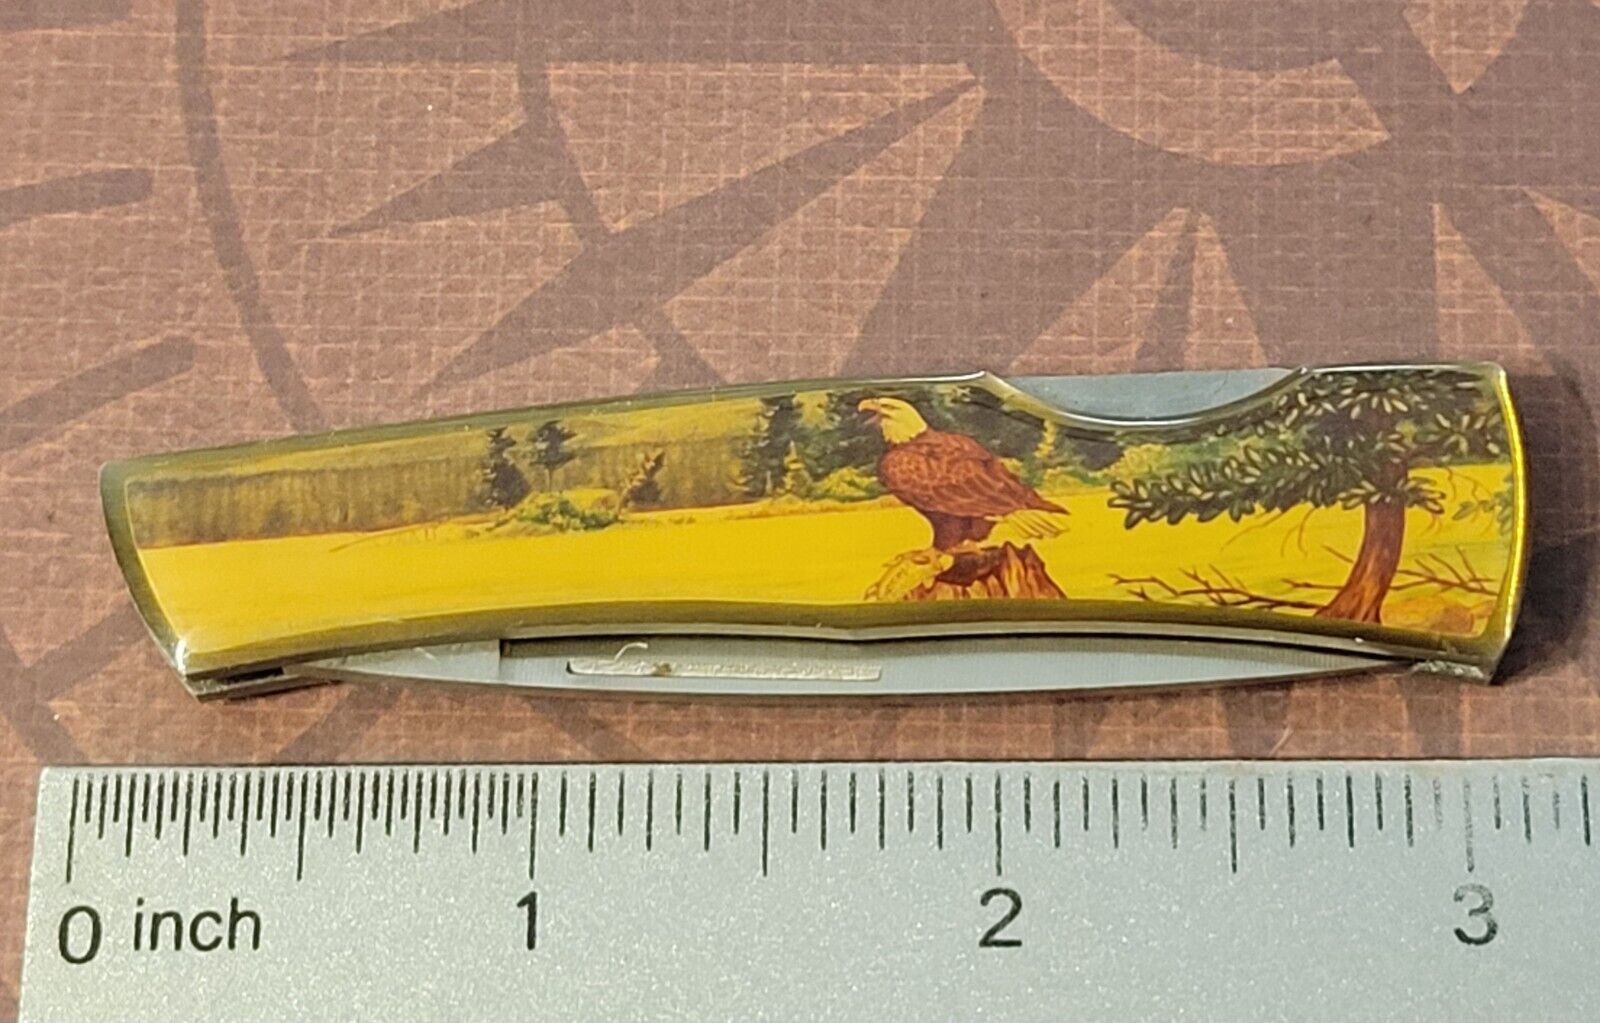 CASE XX Knife Made In USA 1992? Lockback Bald Eagle Picture Handle Vintage